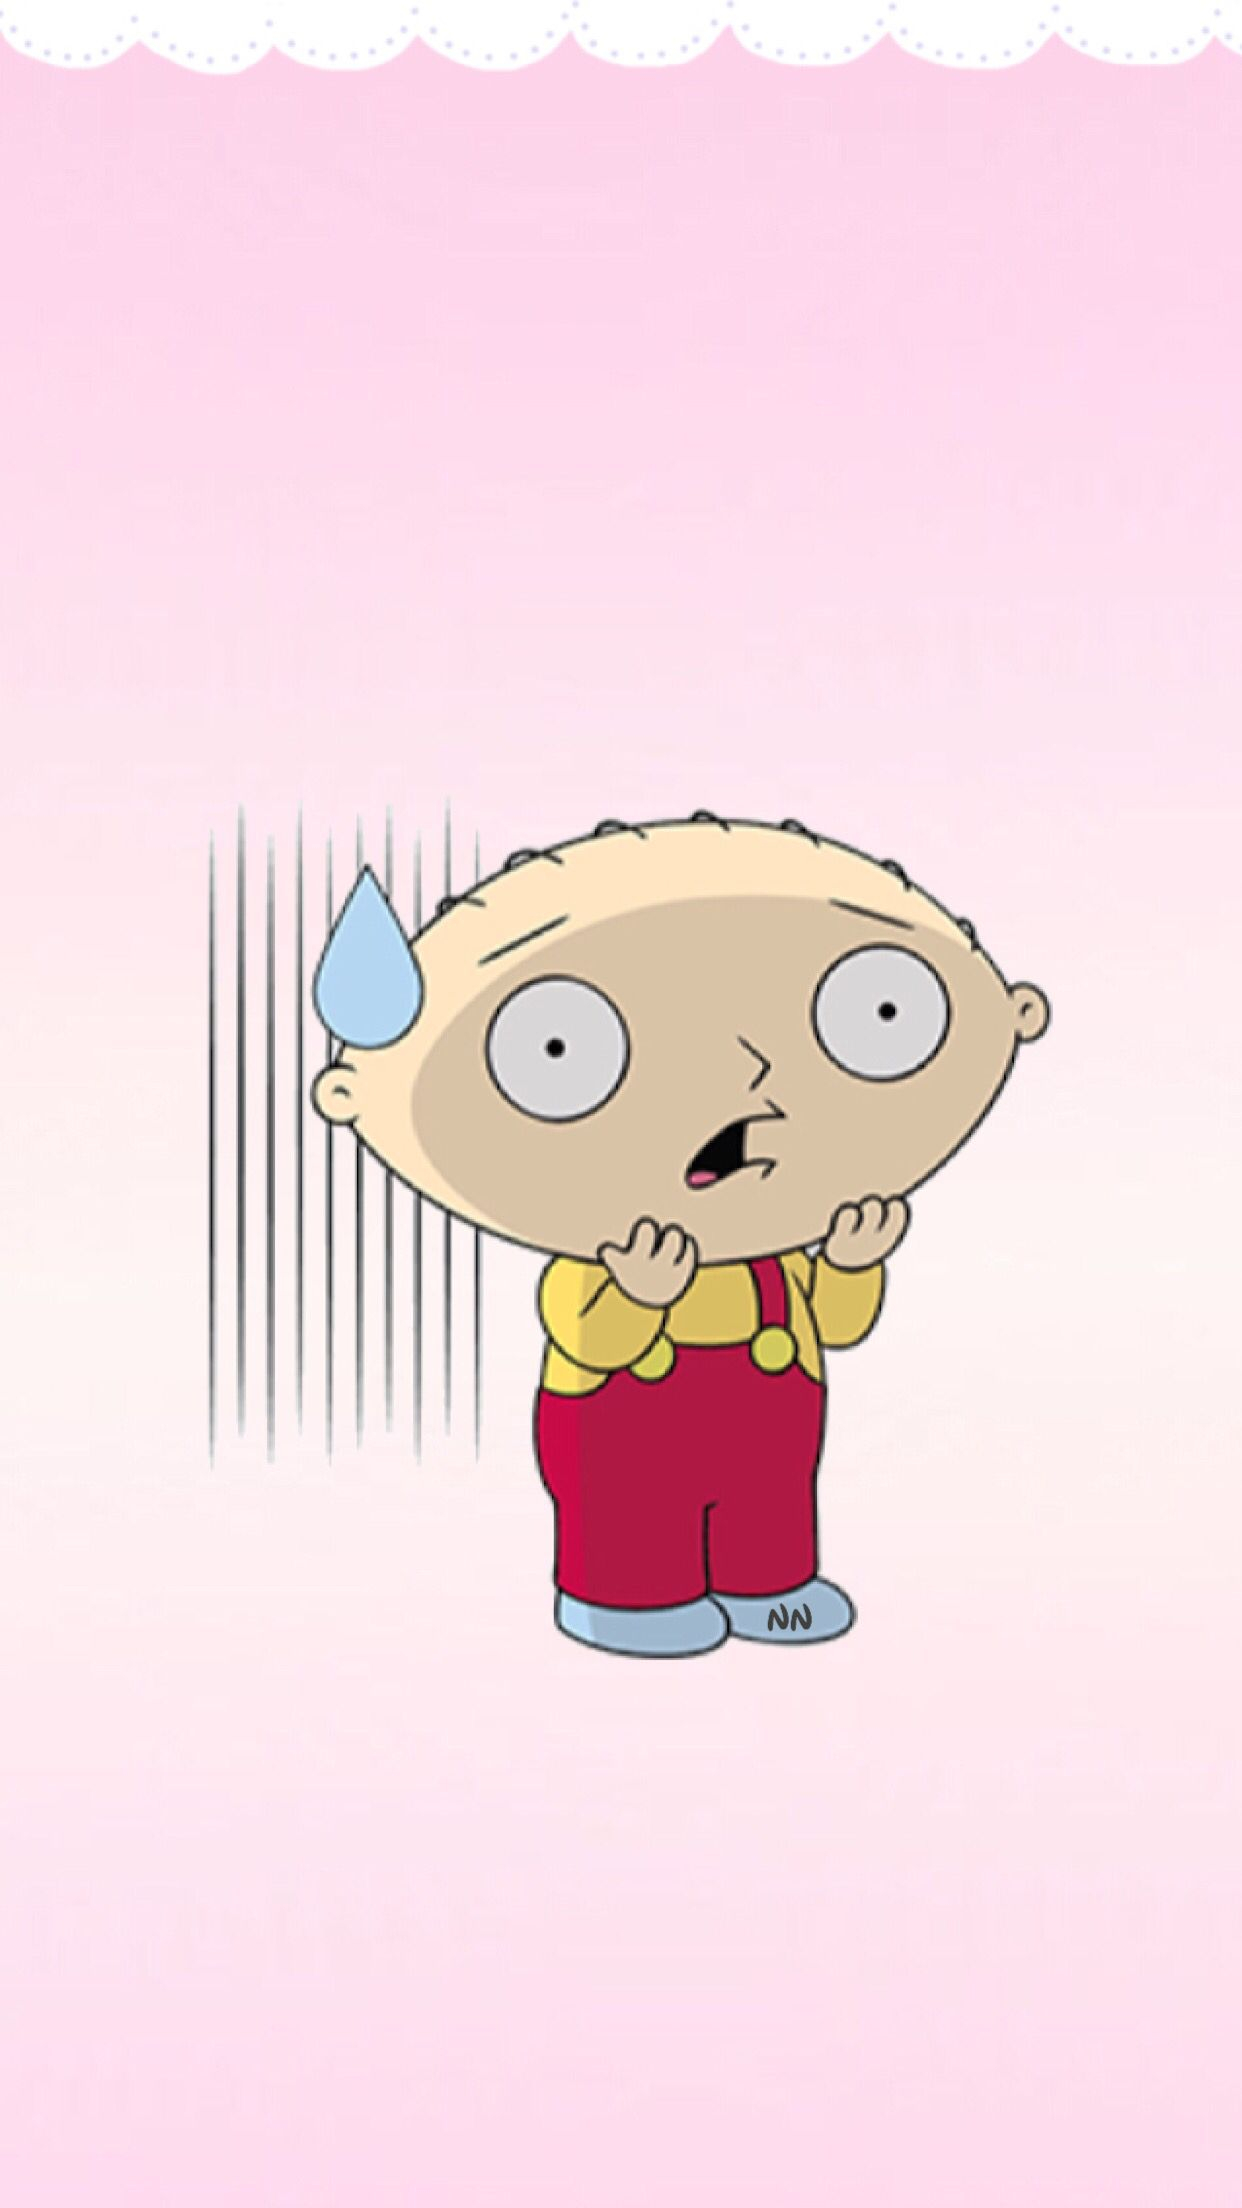 1242x2208 Pin by renata hartman on Girly Wallpaper | Family guy stewie, Stewie griffin, Family movie night themes